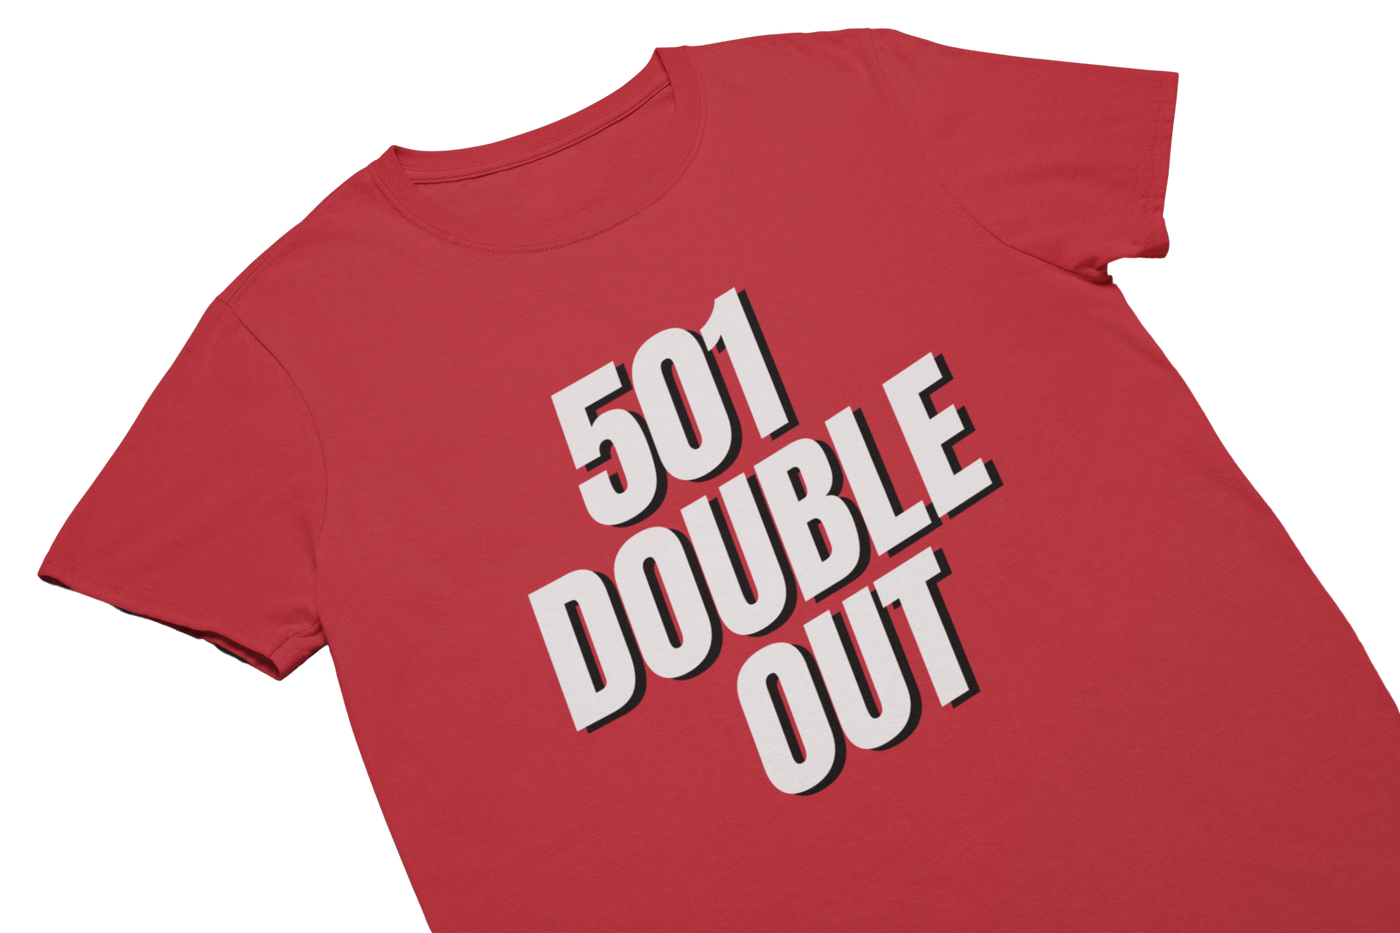 501 DOUBLE OUT (Weiss) - T-Shirt Rot